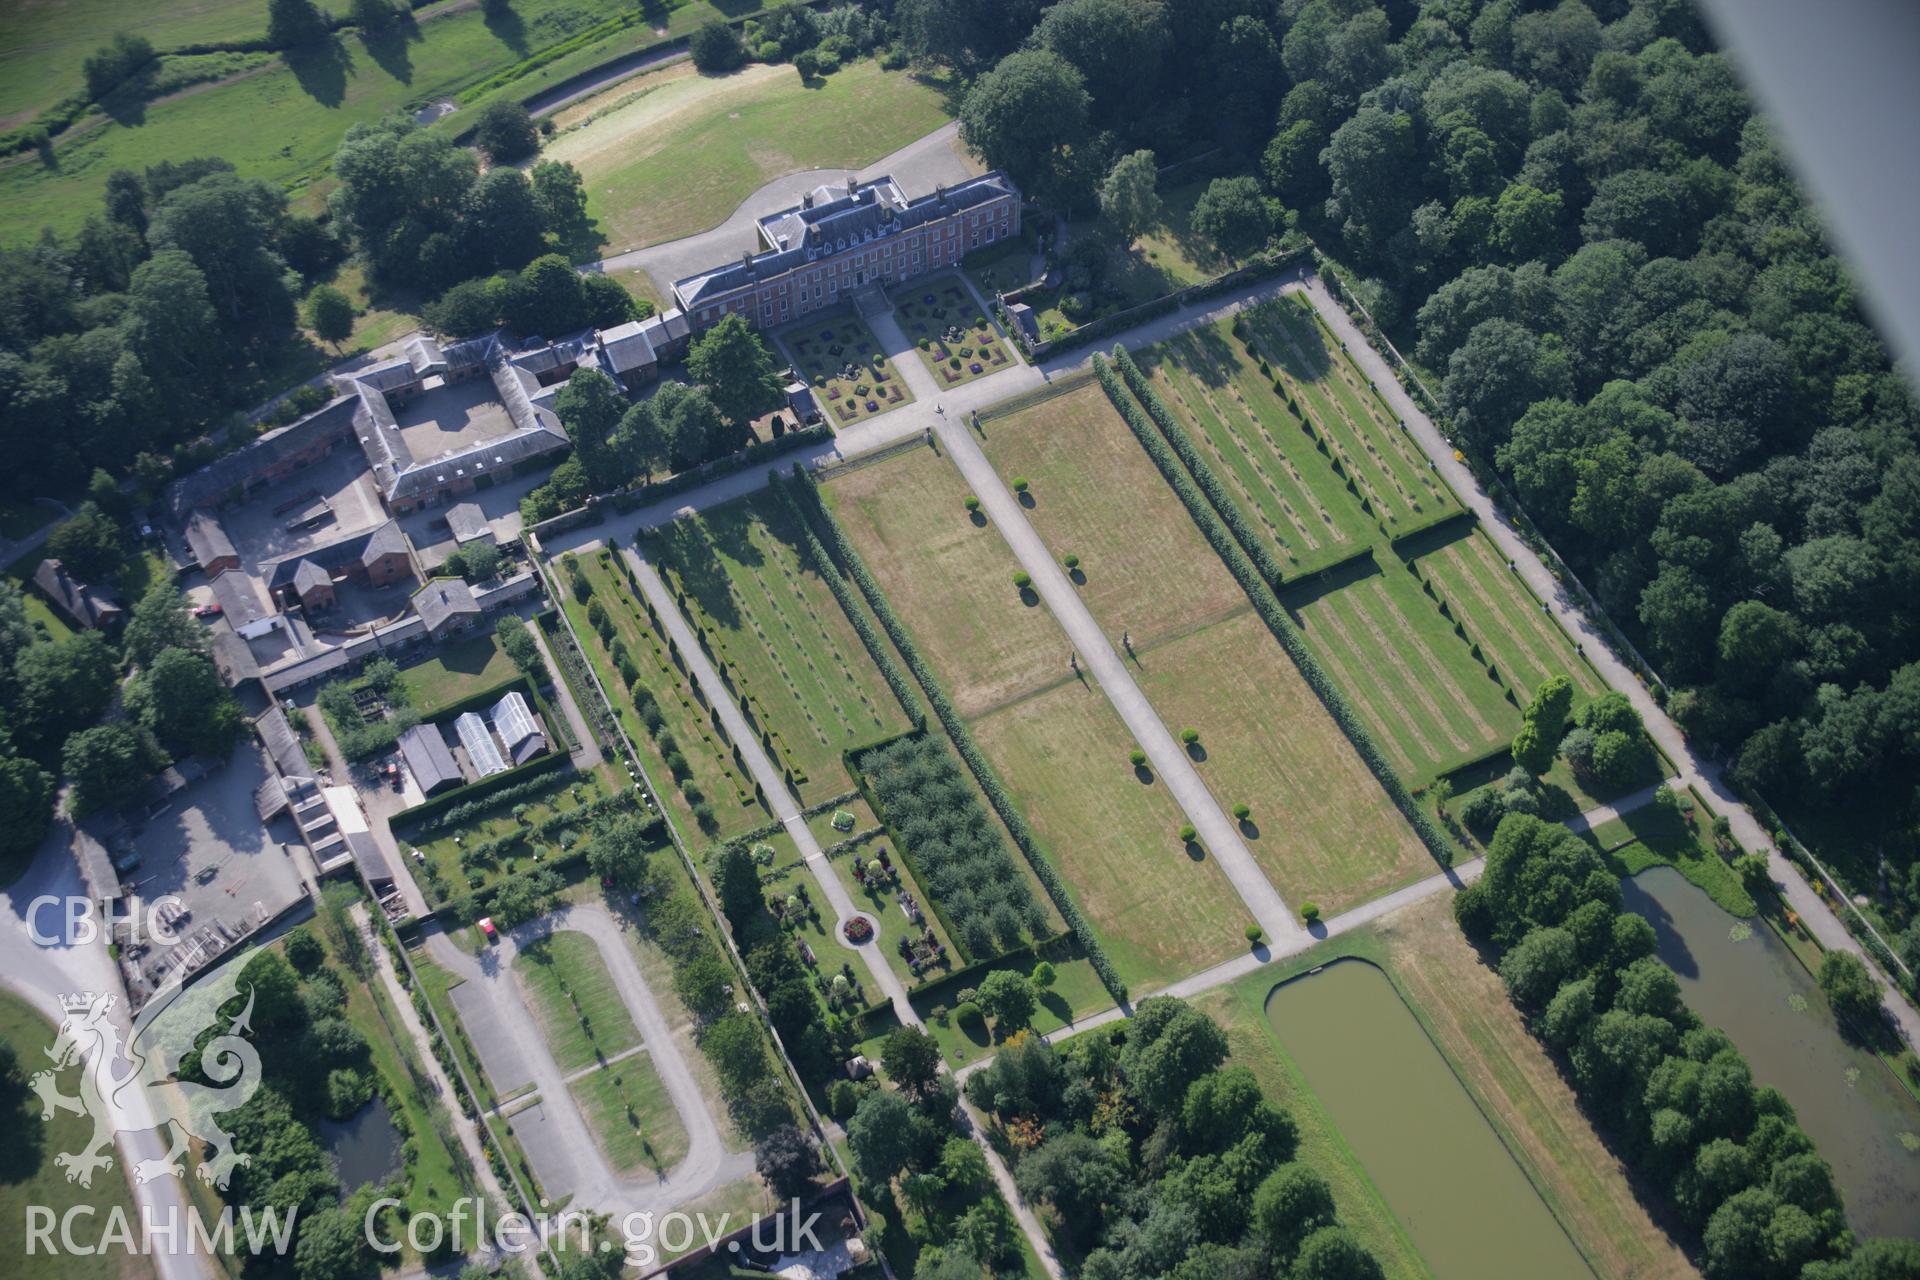 RCAHMW colour oblique aerial photograph of Erddig Park Garden, Wrexham. Taken on 17 July 2006 by Toby Driver.